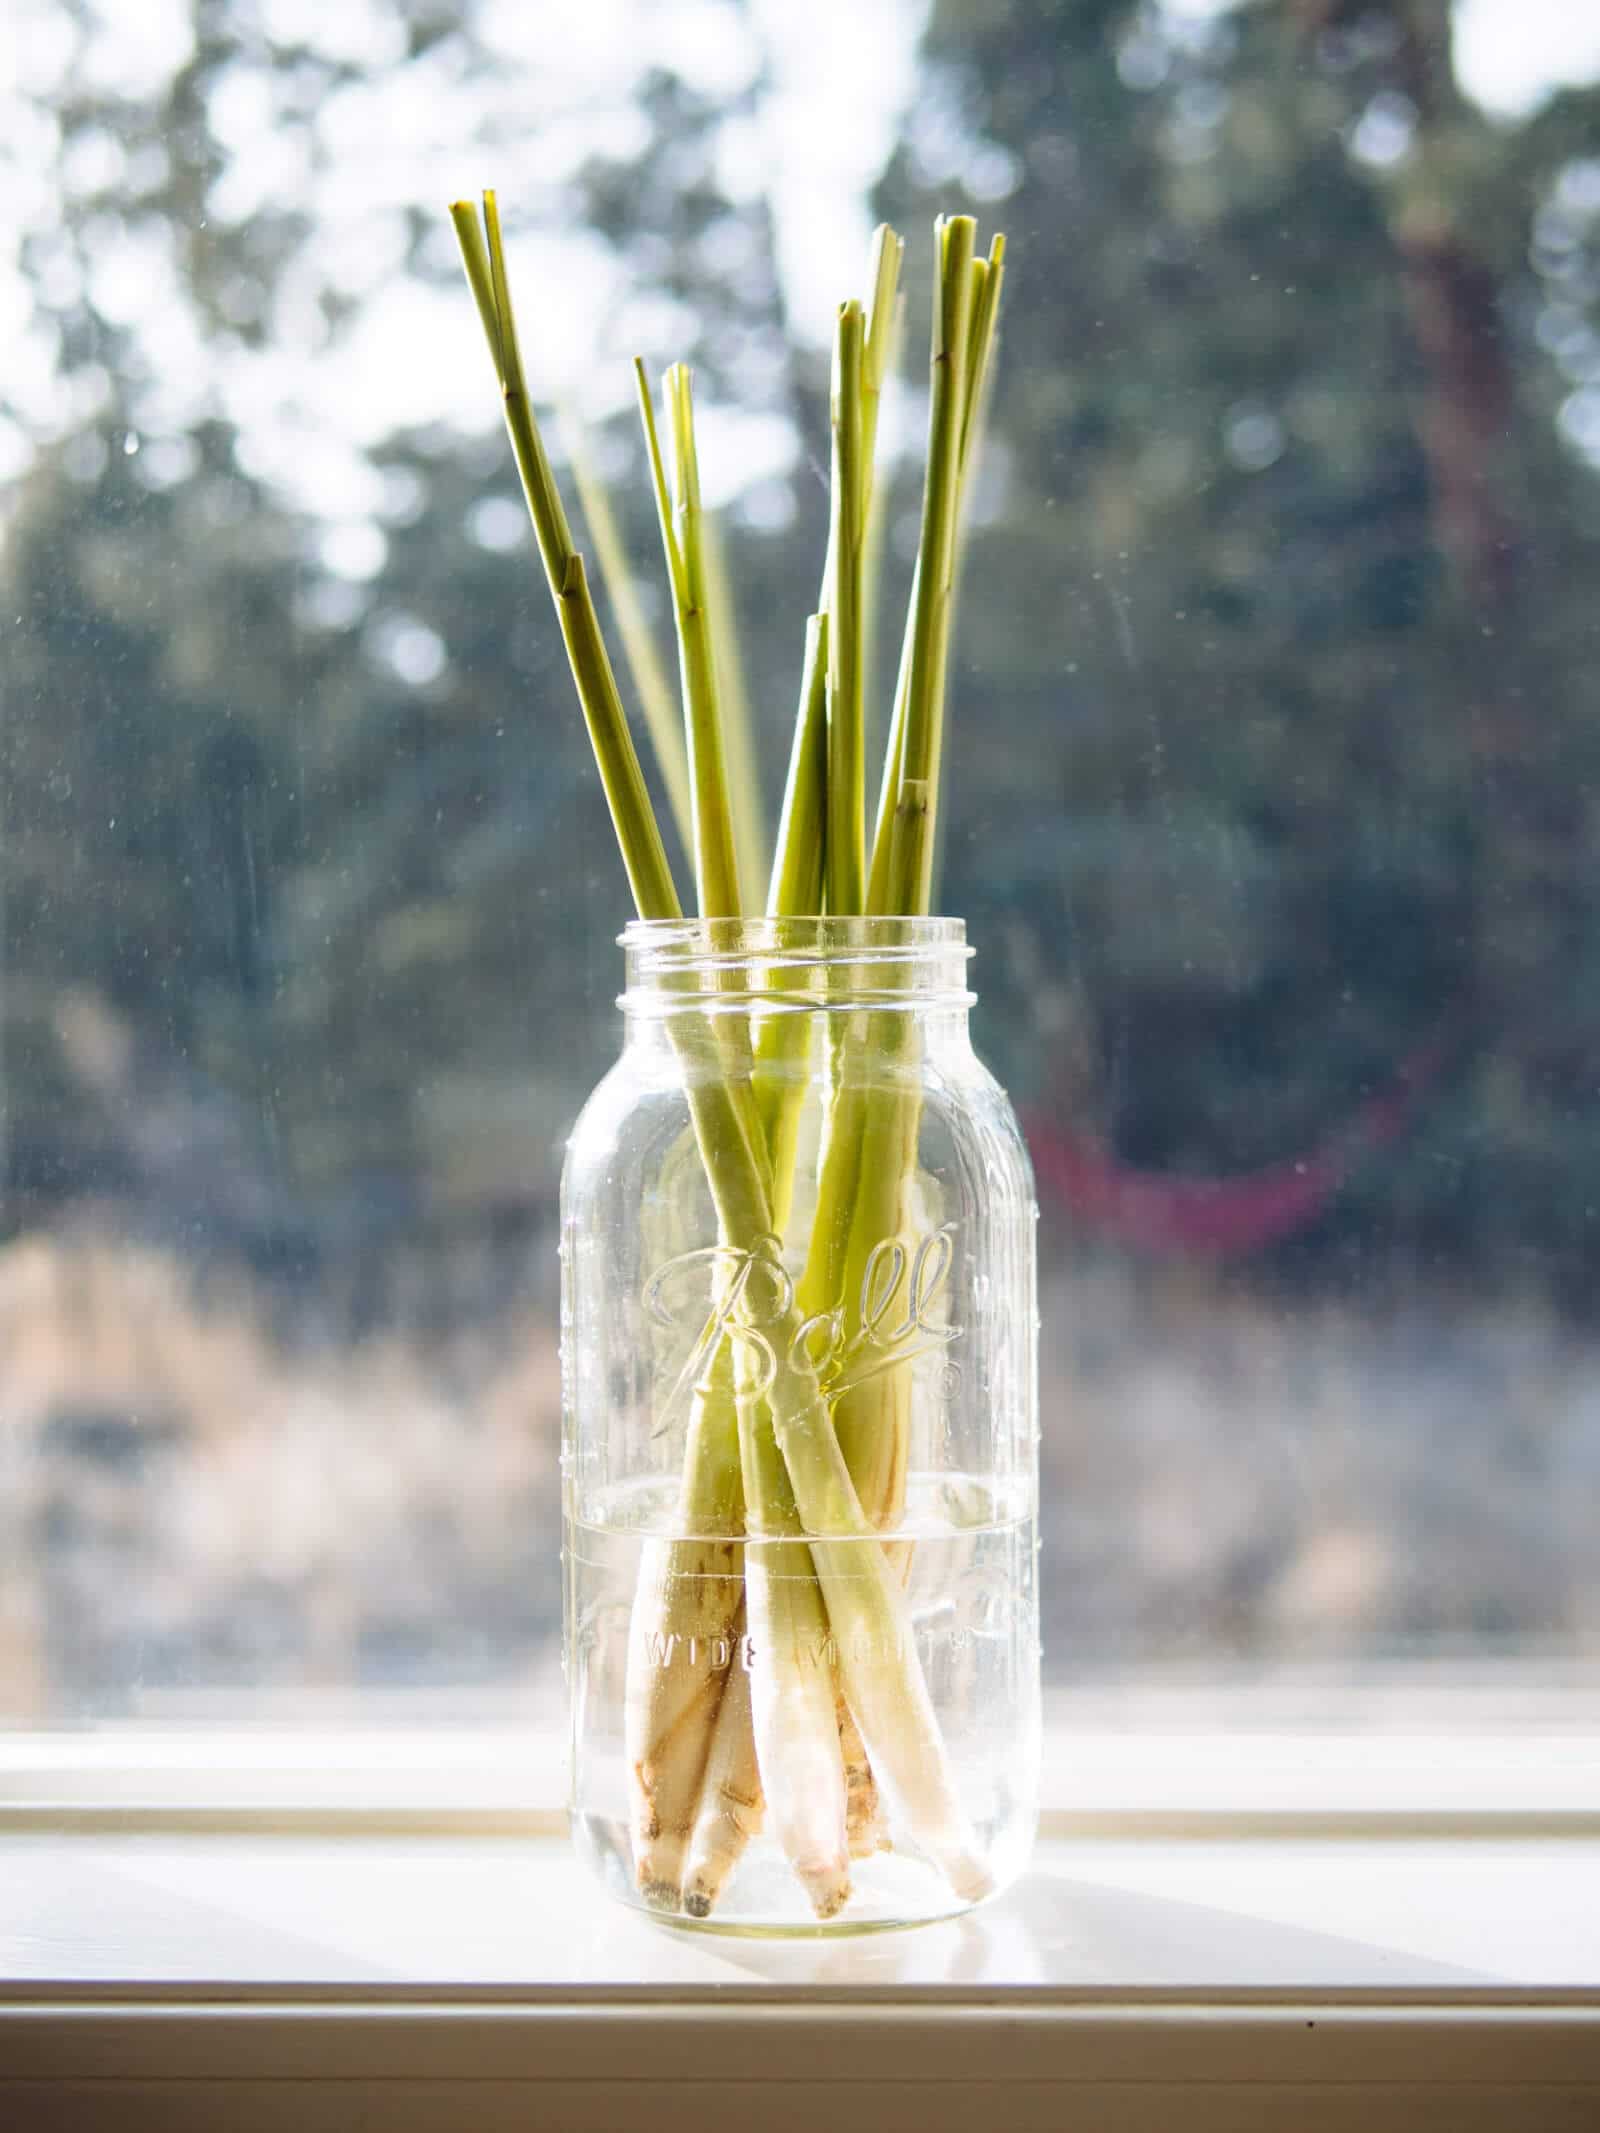 Place the lemongrass stalks in a jar filled with a few inches of water and leave them on a sunny windowsill